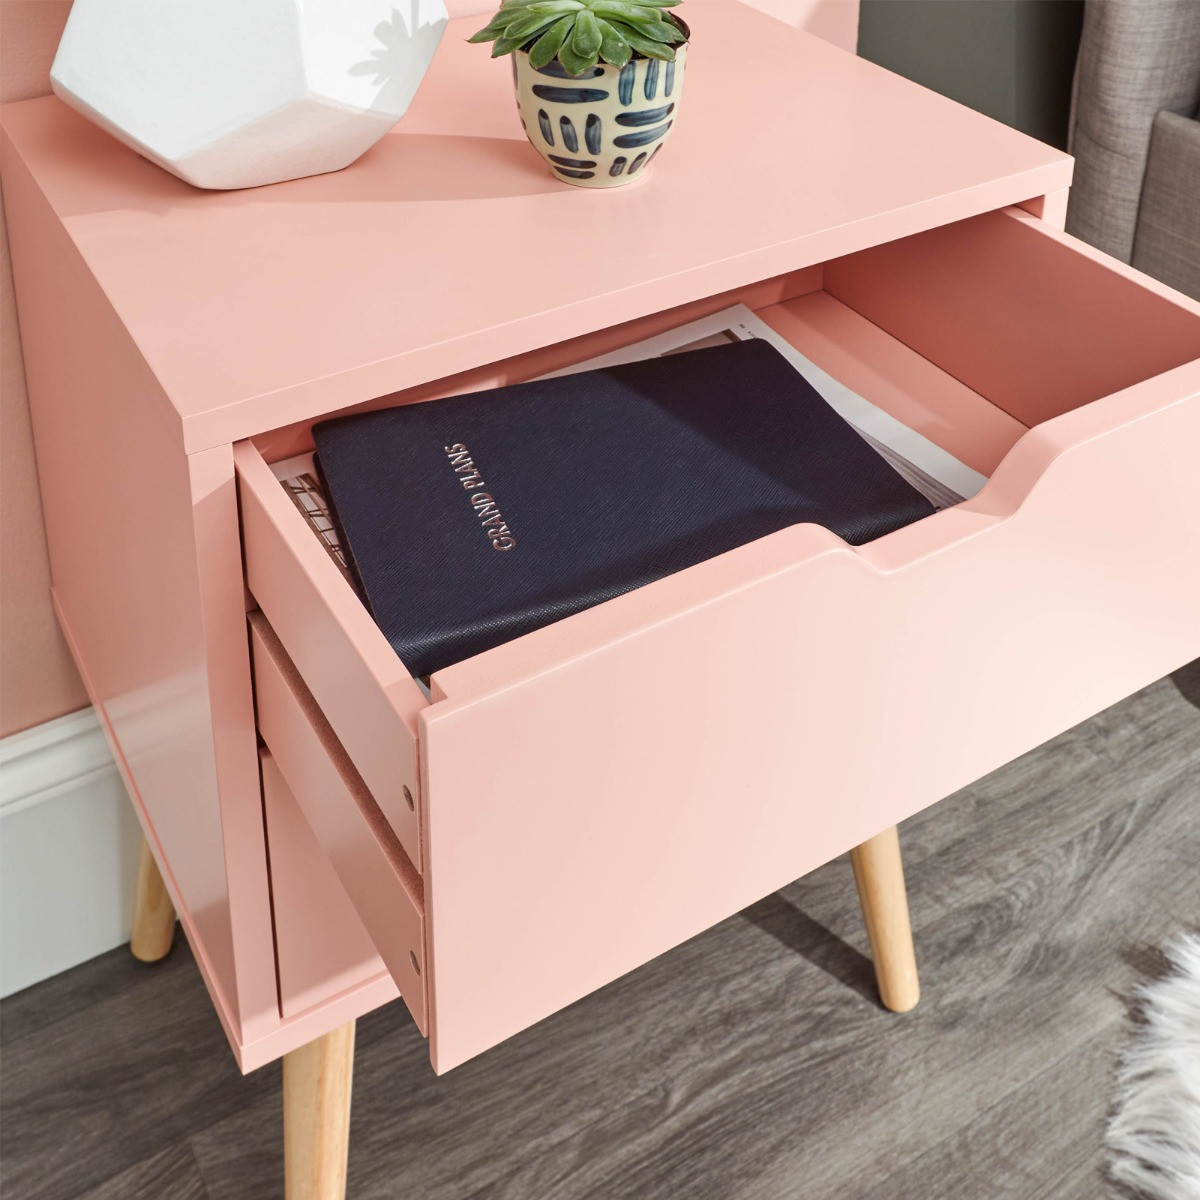 Nyborg Single 2 Drawer Bedside Table - Coral Pink>